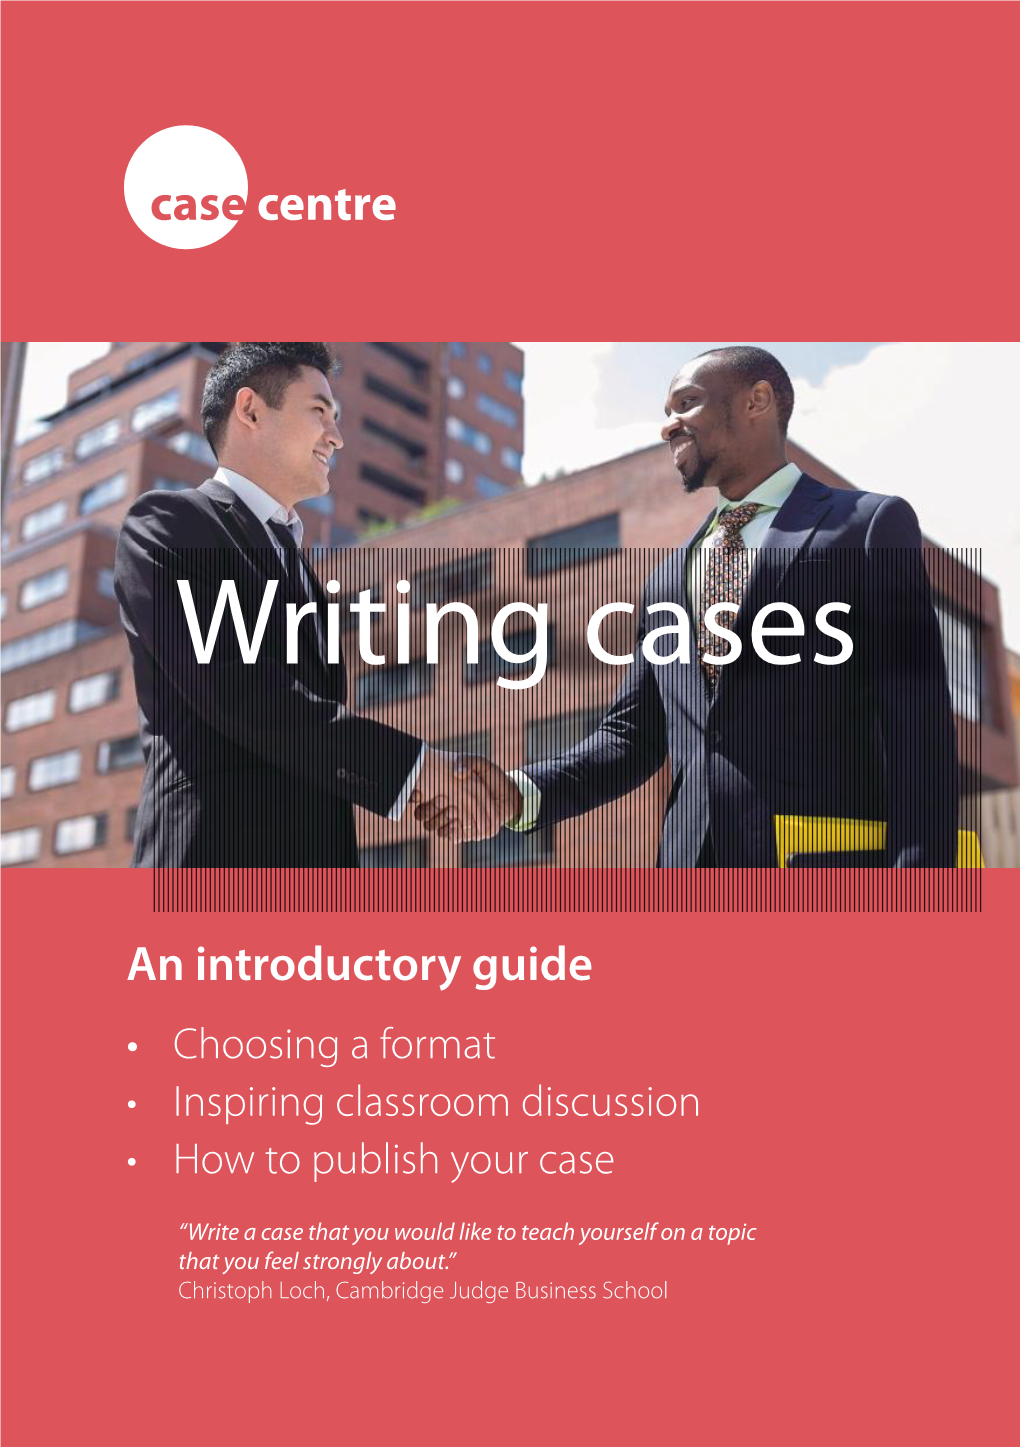 Case Writing Skills and Be Inspired at One of Our Expert-Led Case Writing Workshops